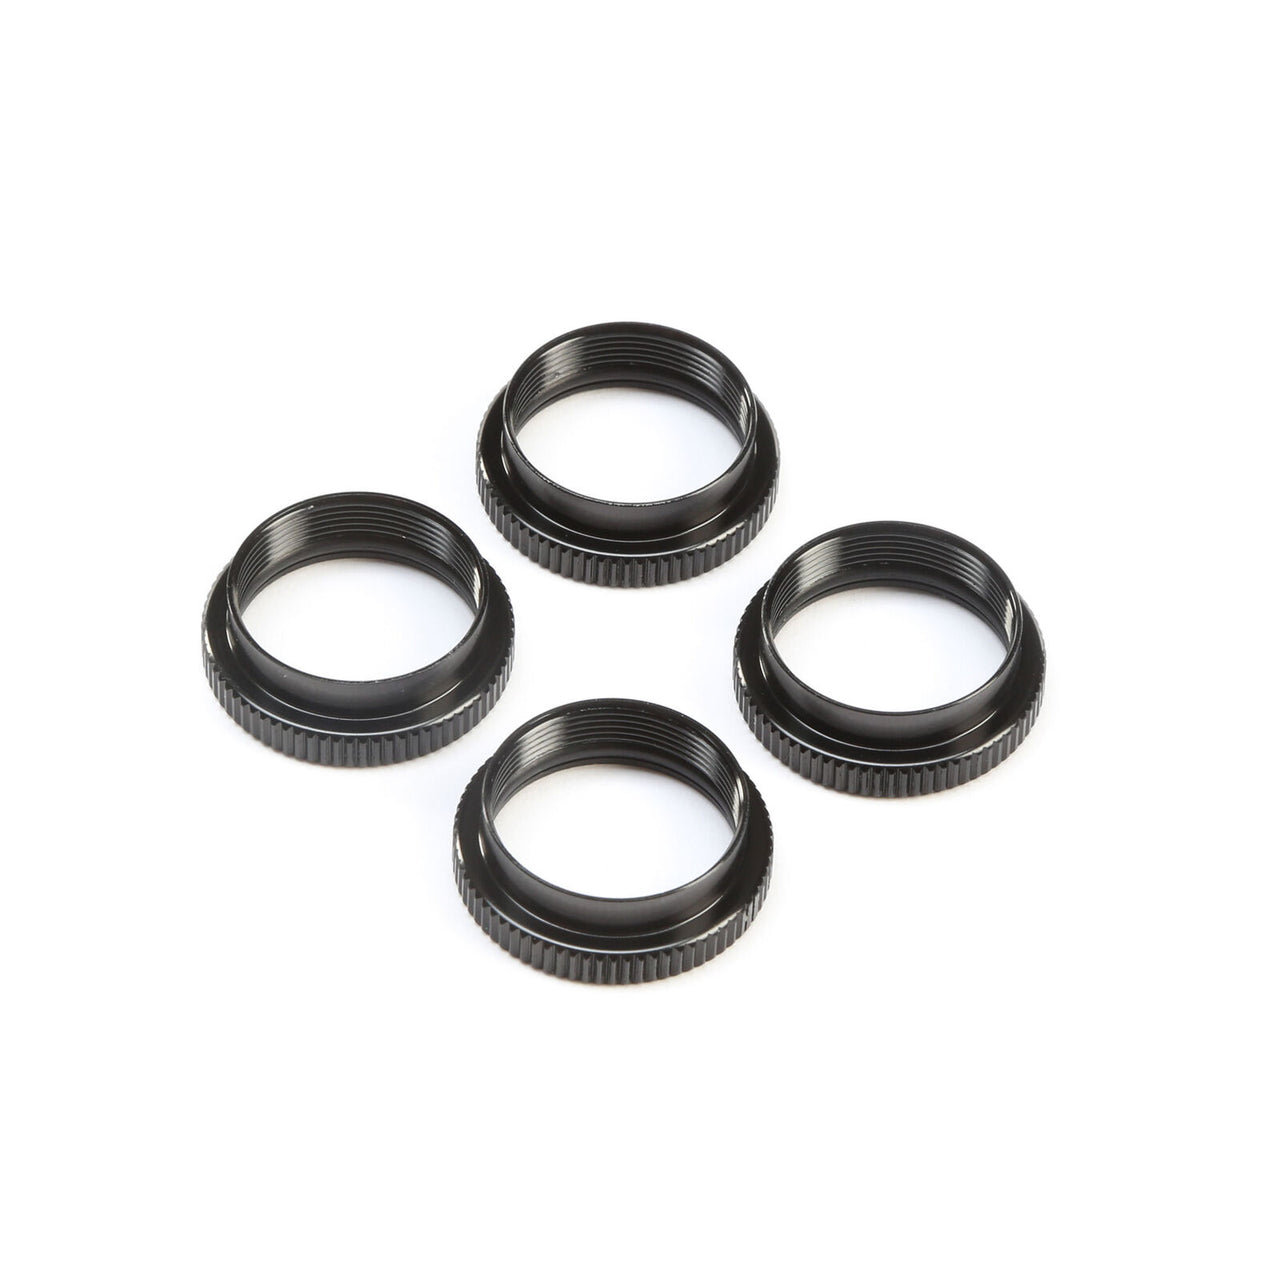 TLR243045 16MM SHOCK NUTS & O-RINGS (4): 8X